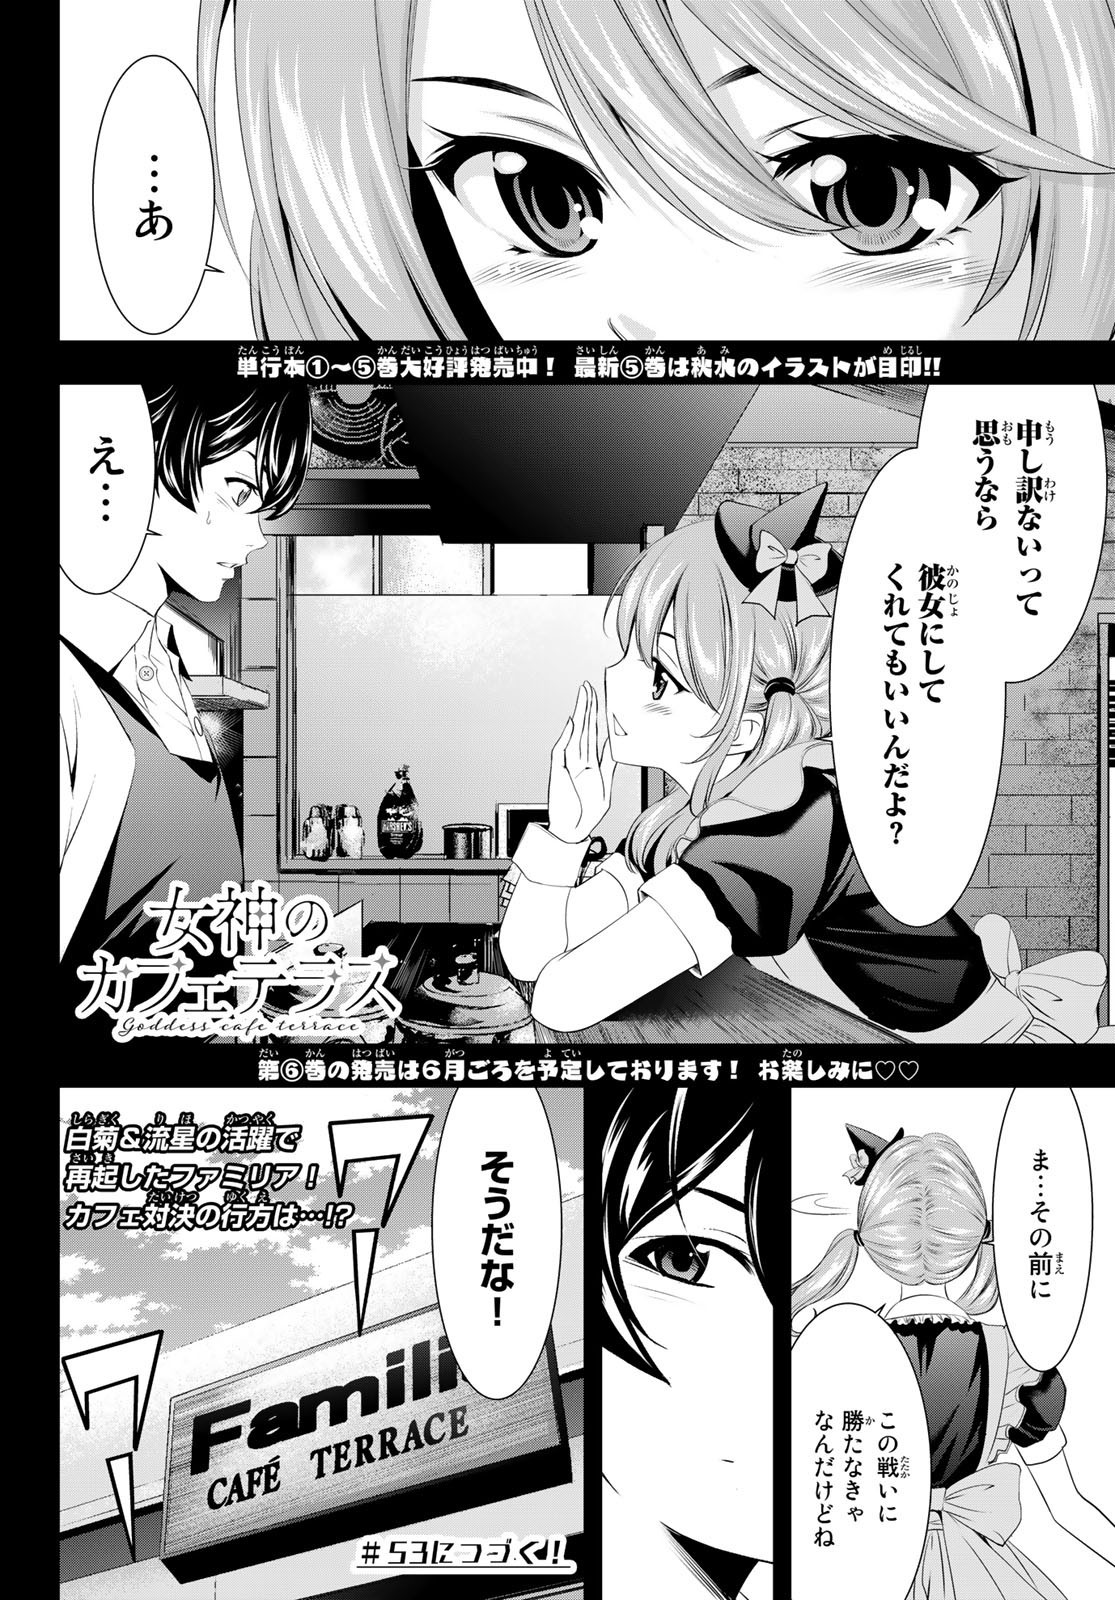 Goddess-Cafe-Terrace - Chapter 052 - Page 18